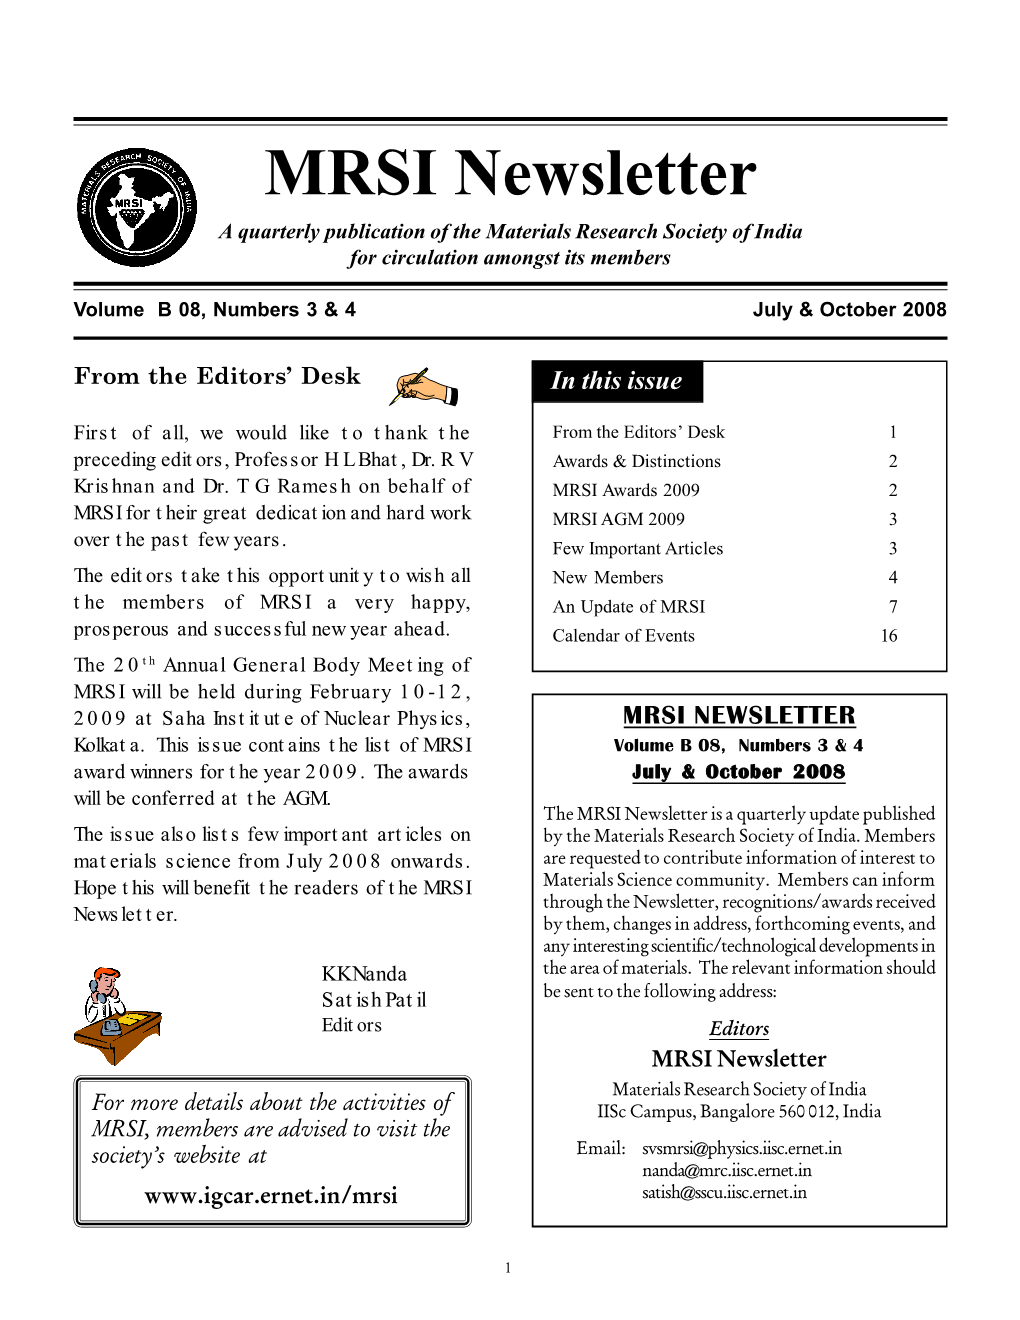 MRSI Newsletter a Quarterly Publication of the Materials Research Society of India for Circulation Amongst Its Members